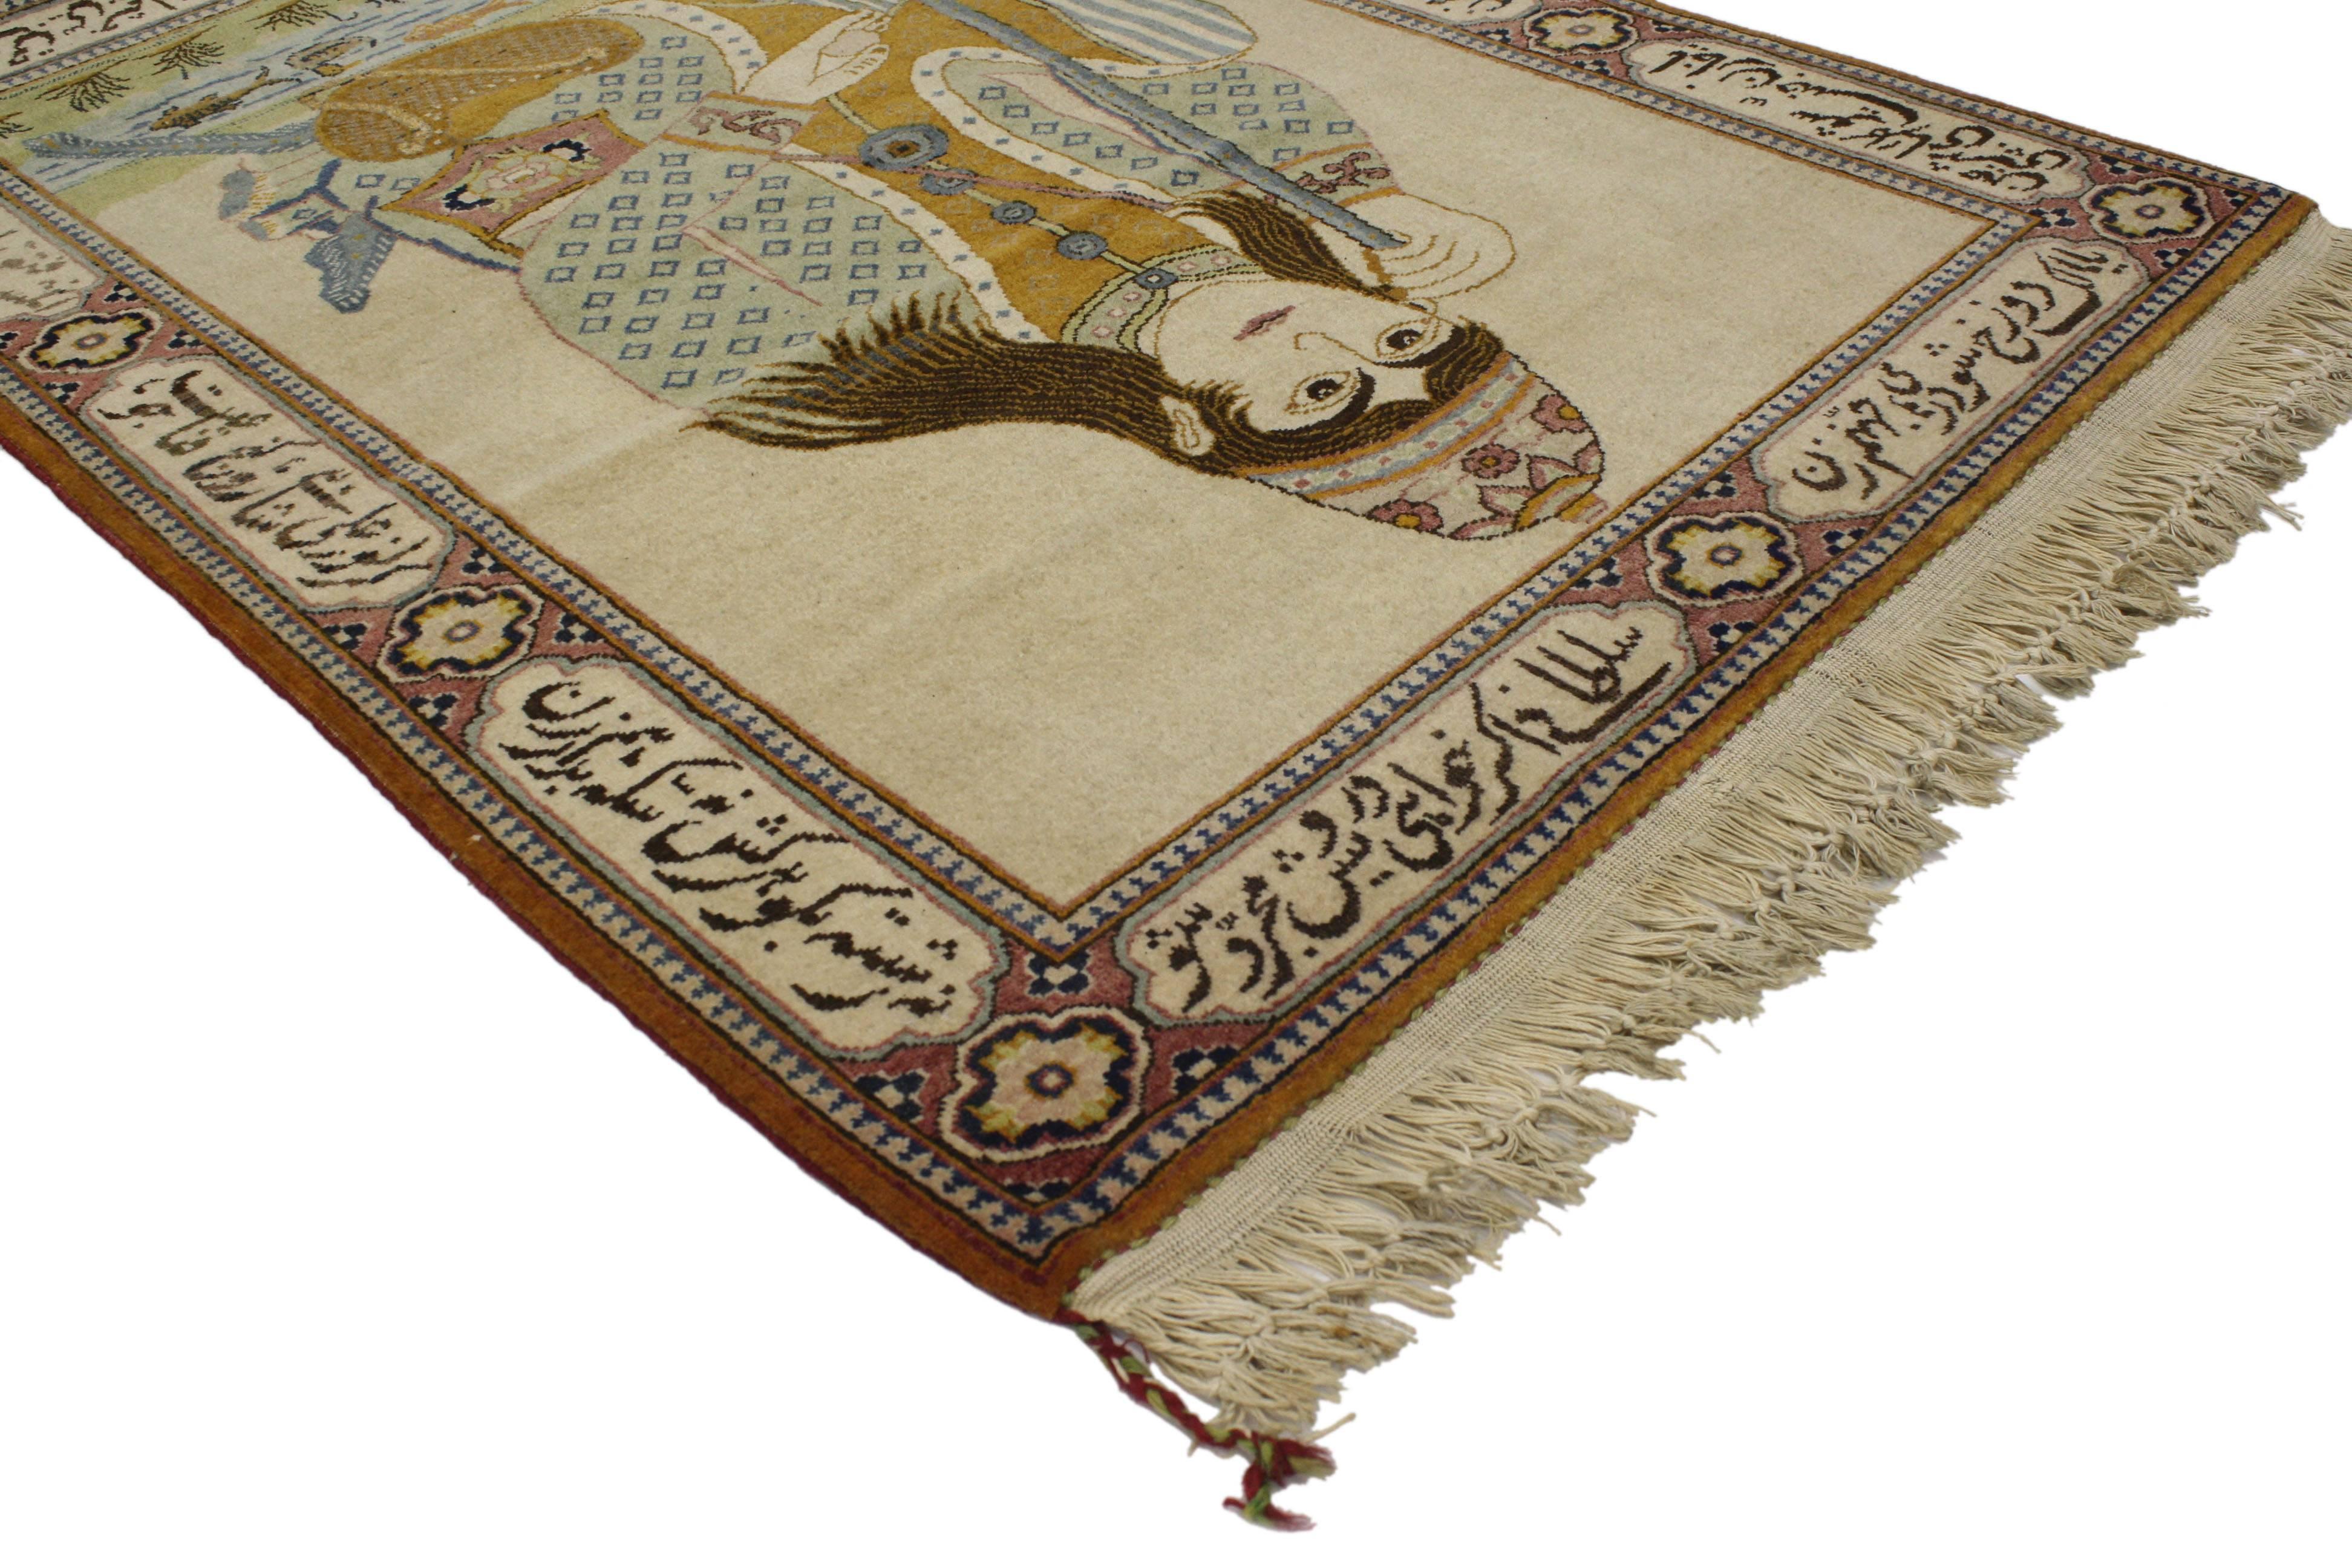 77017 Antique Persian Kashan Pictorial Rug, Dervish in a Garden Tapestry, Wall Hanging with Poetry of Abbas Foroughi Bastami. Drawing inspiration from the famous dervish Nur Ali Shah, this antique Persian Kashan rug is a beautiful example of an